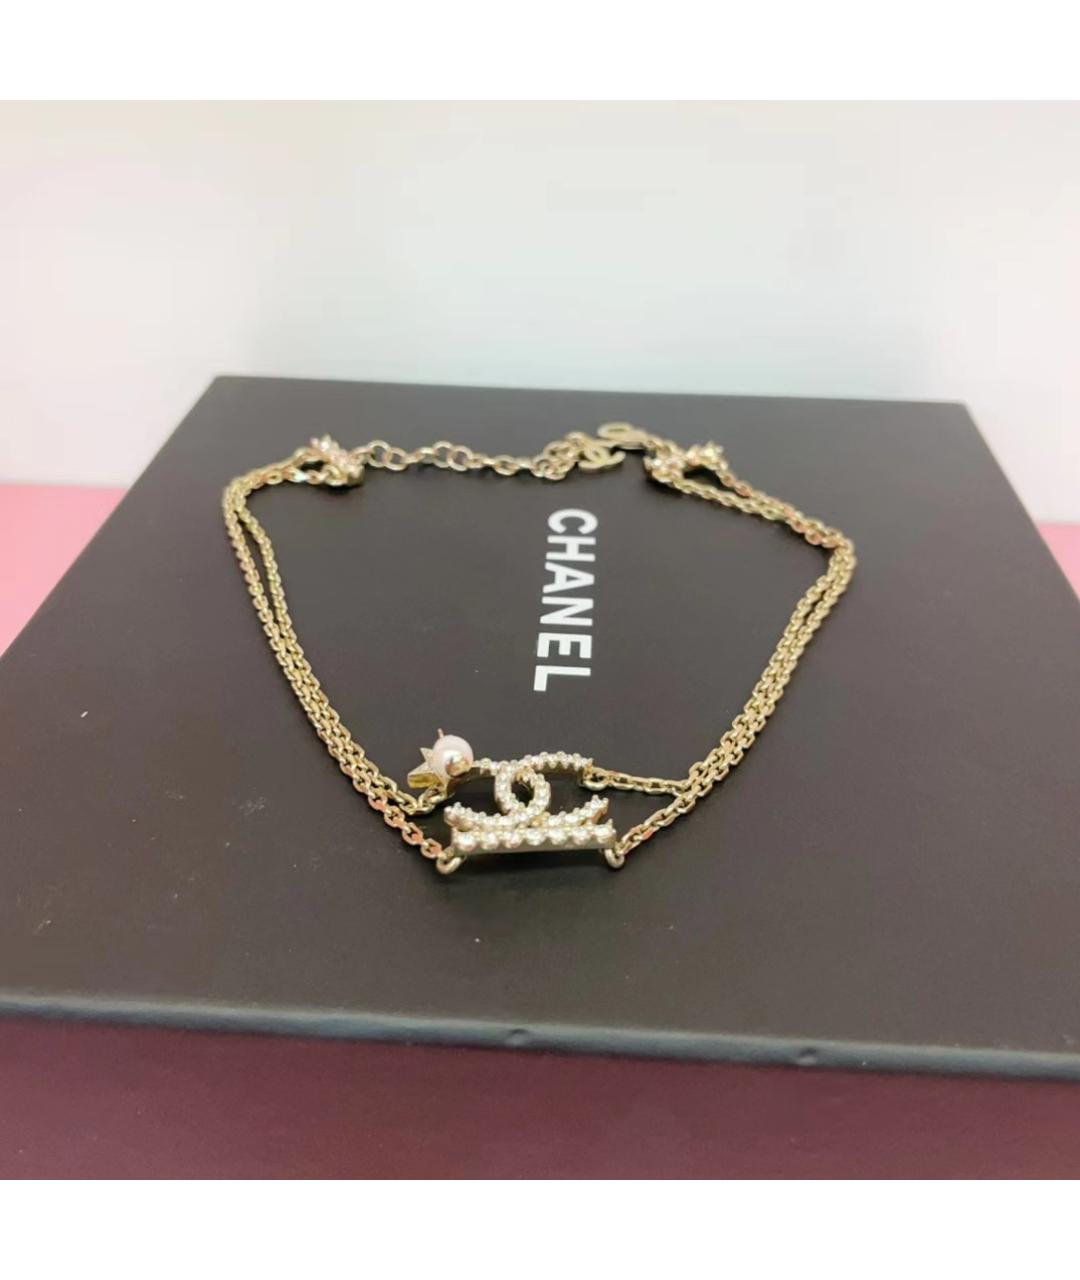 CHANEL PRE-OWNED Колье, фото 2